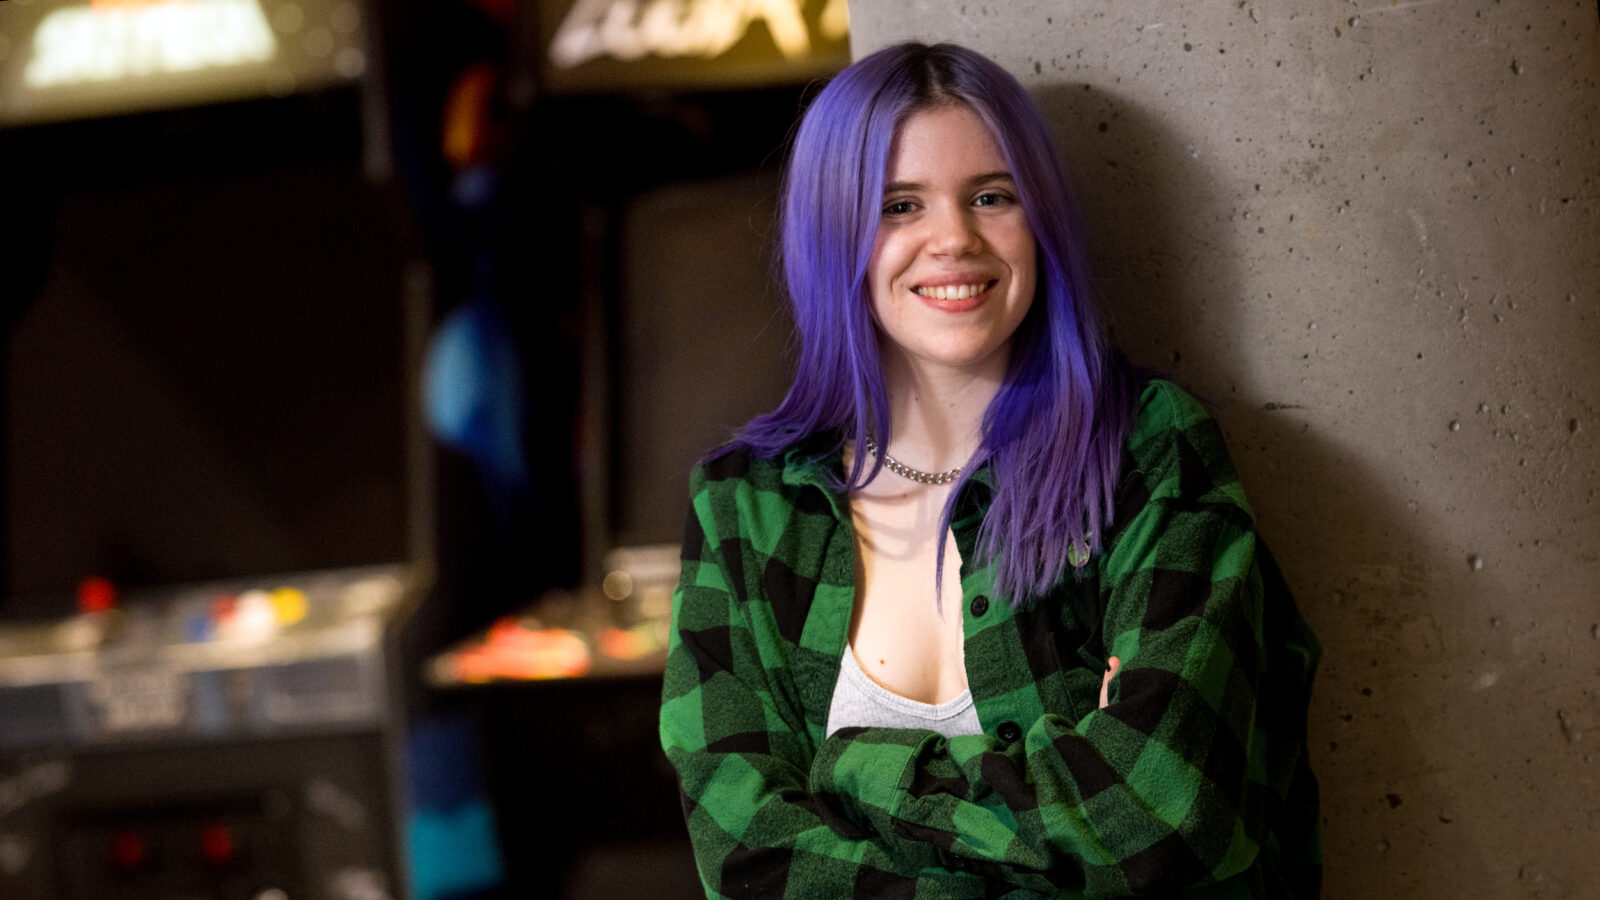 female student with purple hair stands in front of arcade games, smile at camera